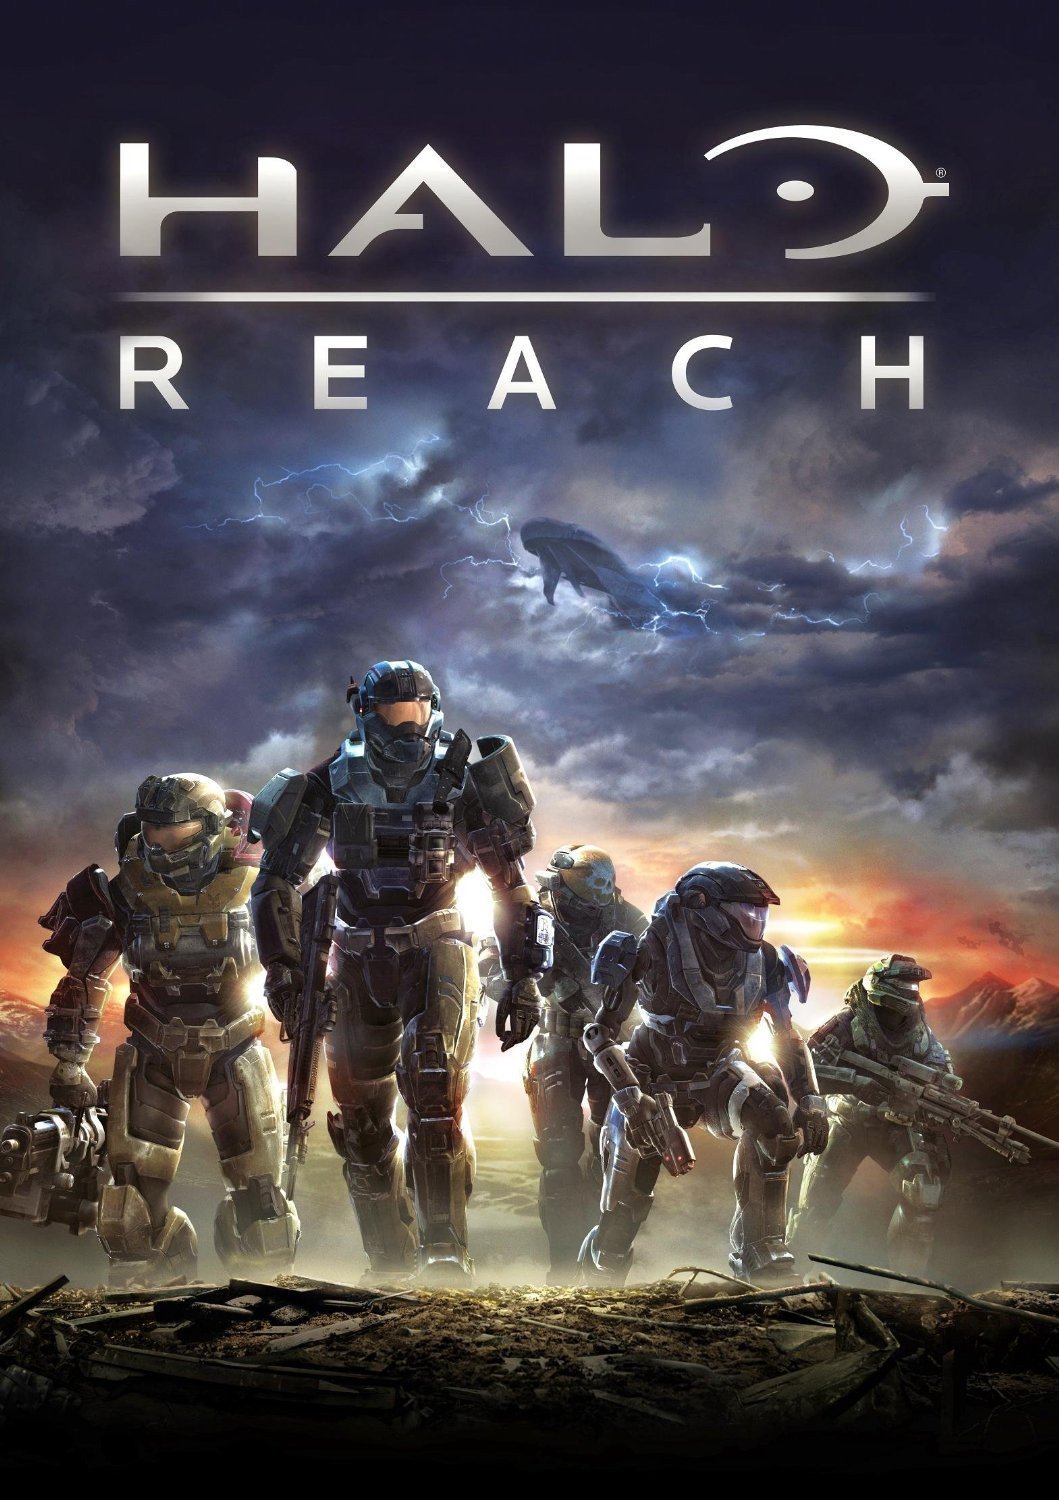 Image of Halo: Reach